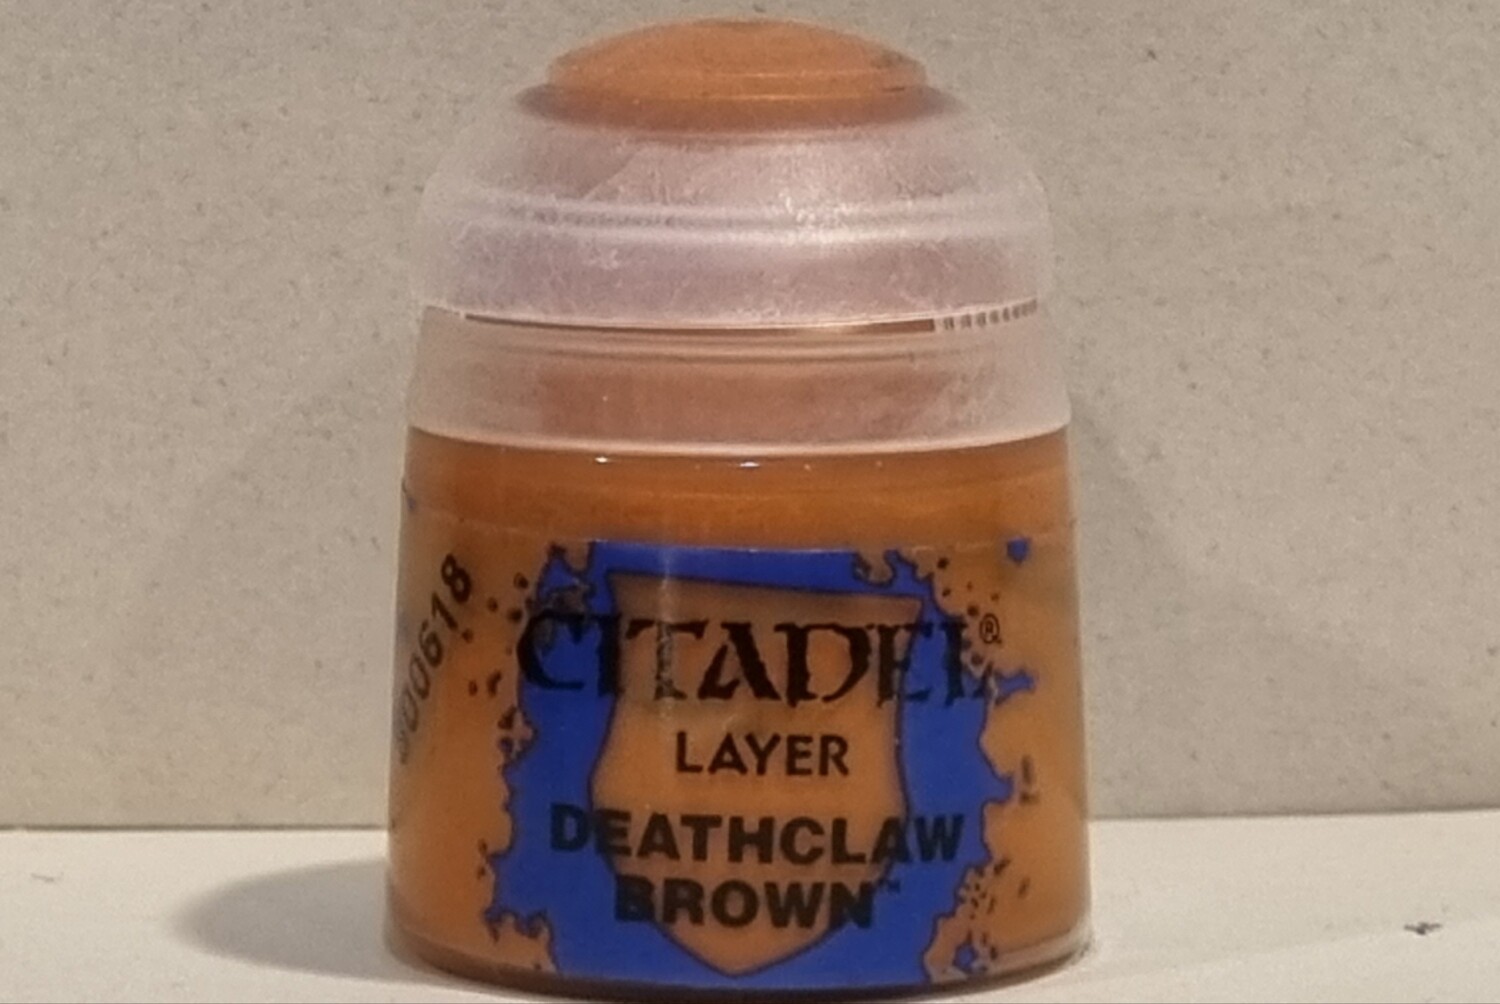 Citadel, Paint, Layer, Deathclaw Brown, 12ml, 22-41